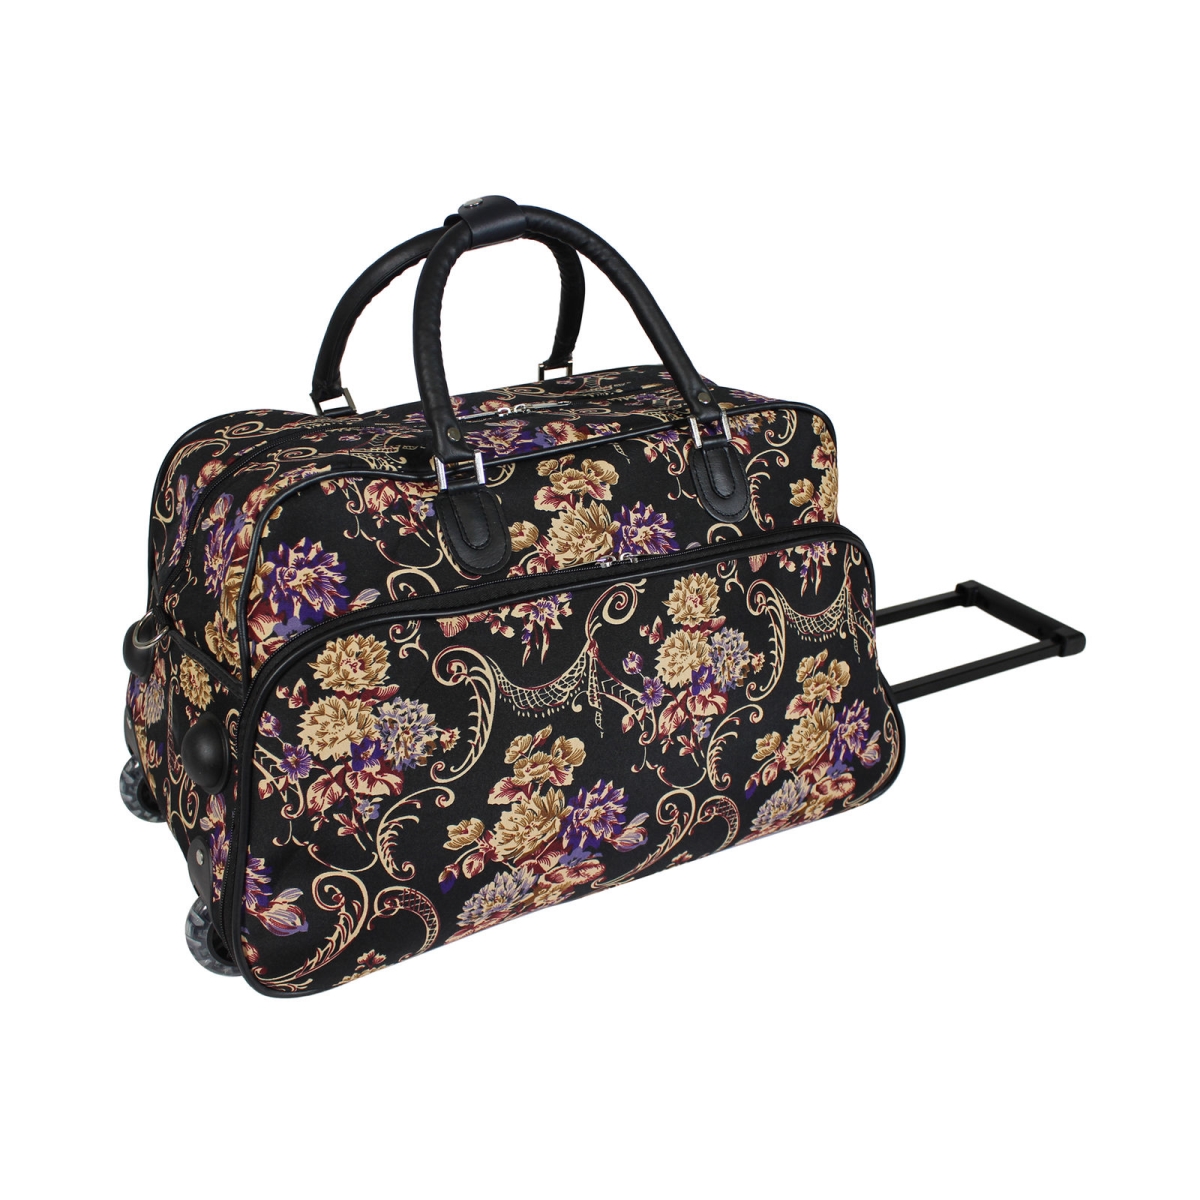 8112022-209 21 In. Classic Floral Carry-on Rolling Duffel Bag